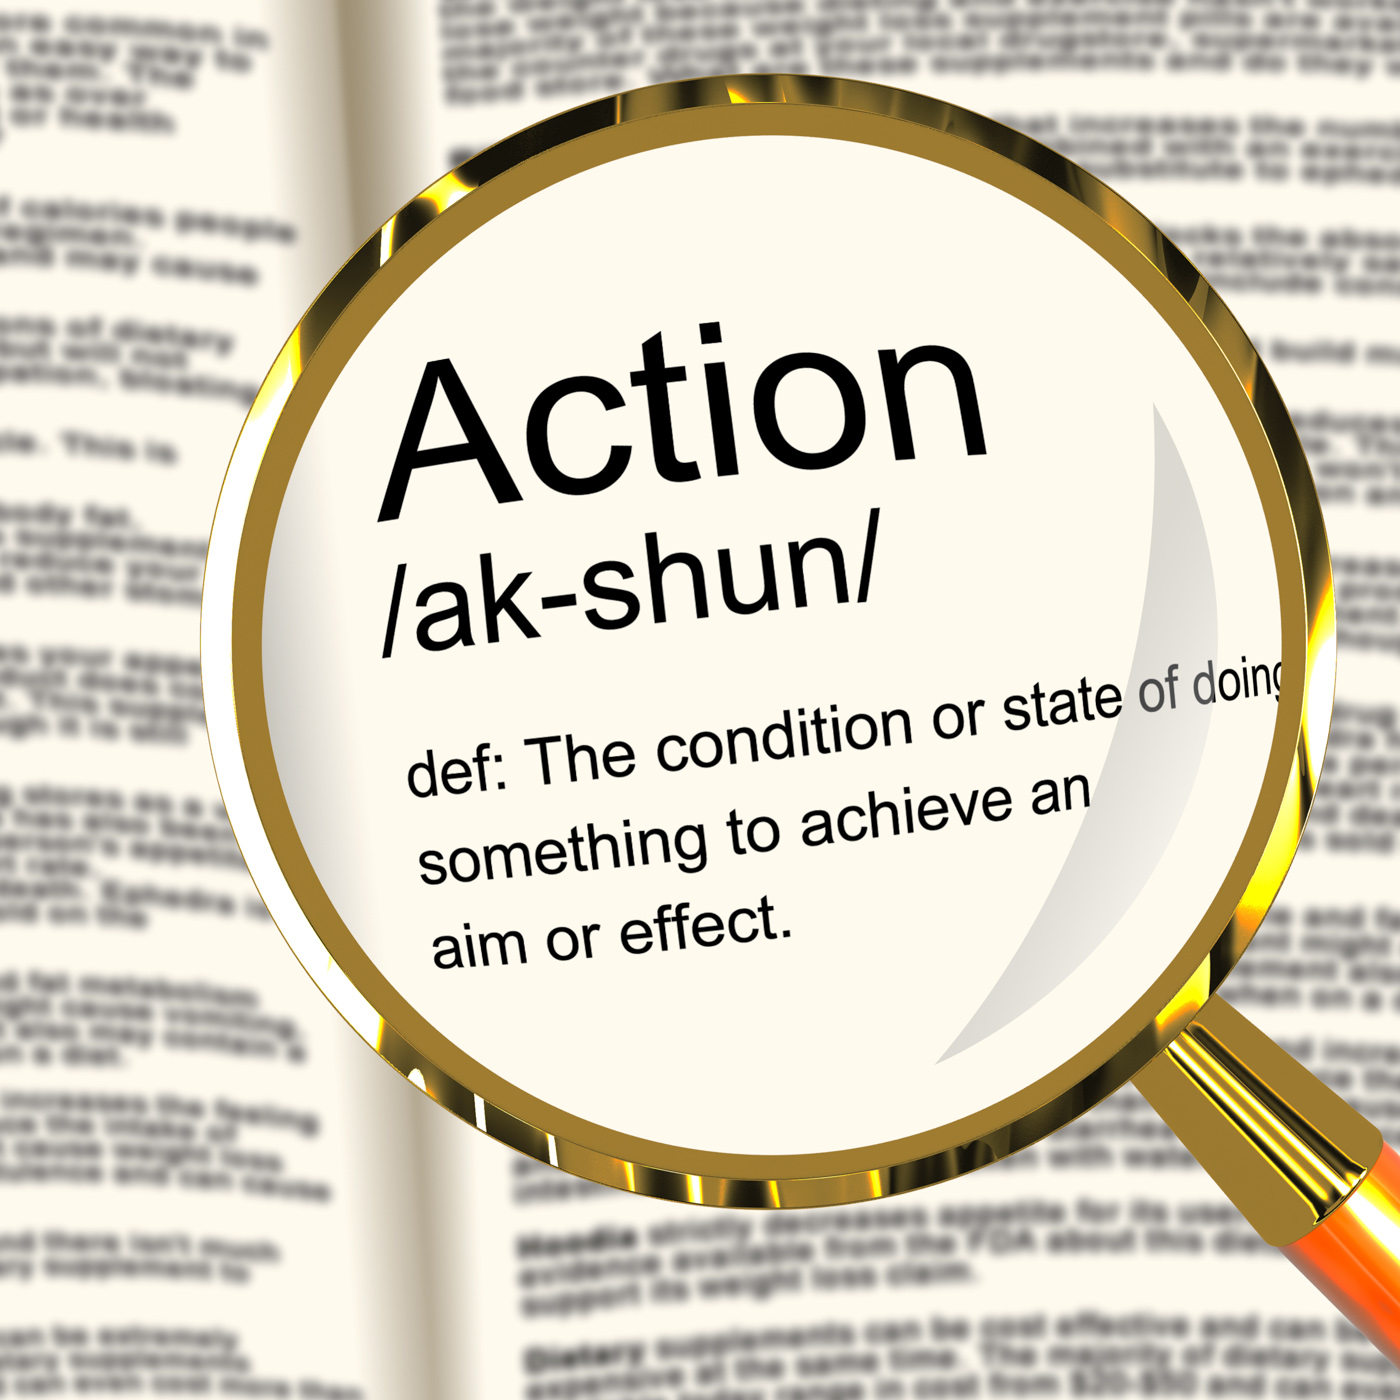 Action definition magnifier showing acting or proactive photo